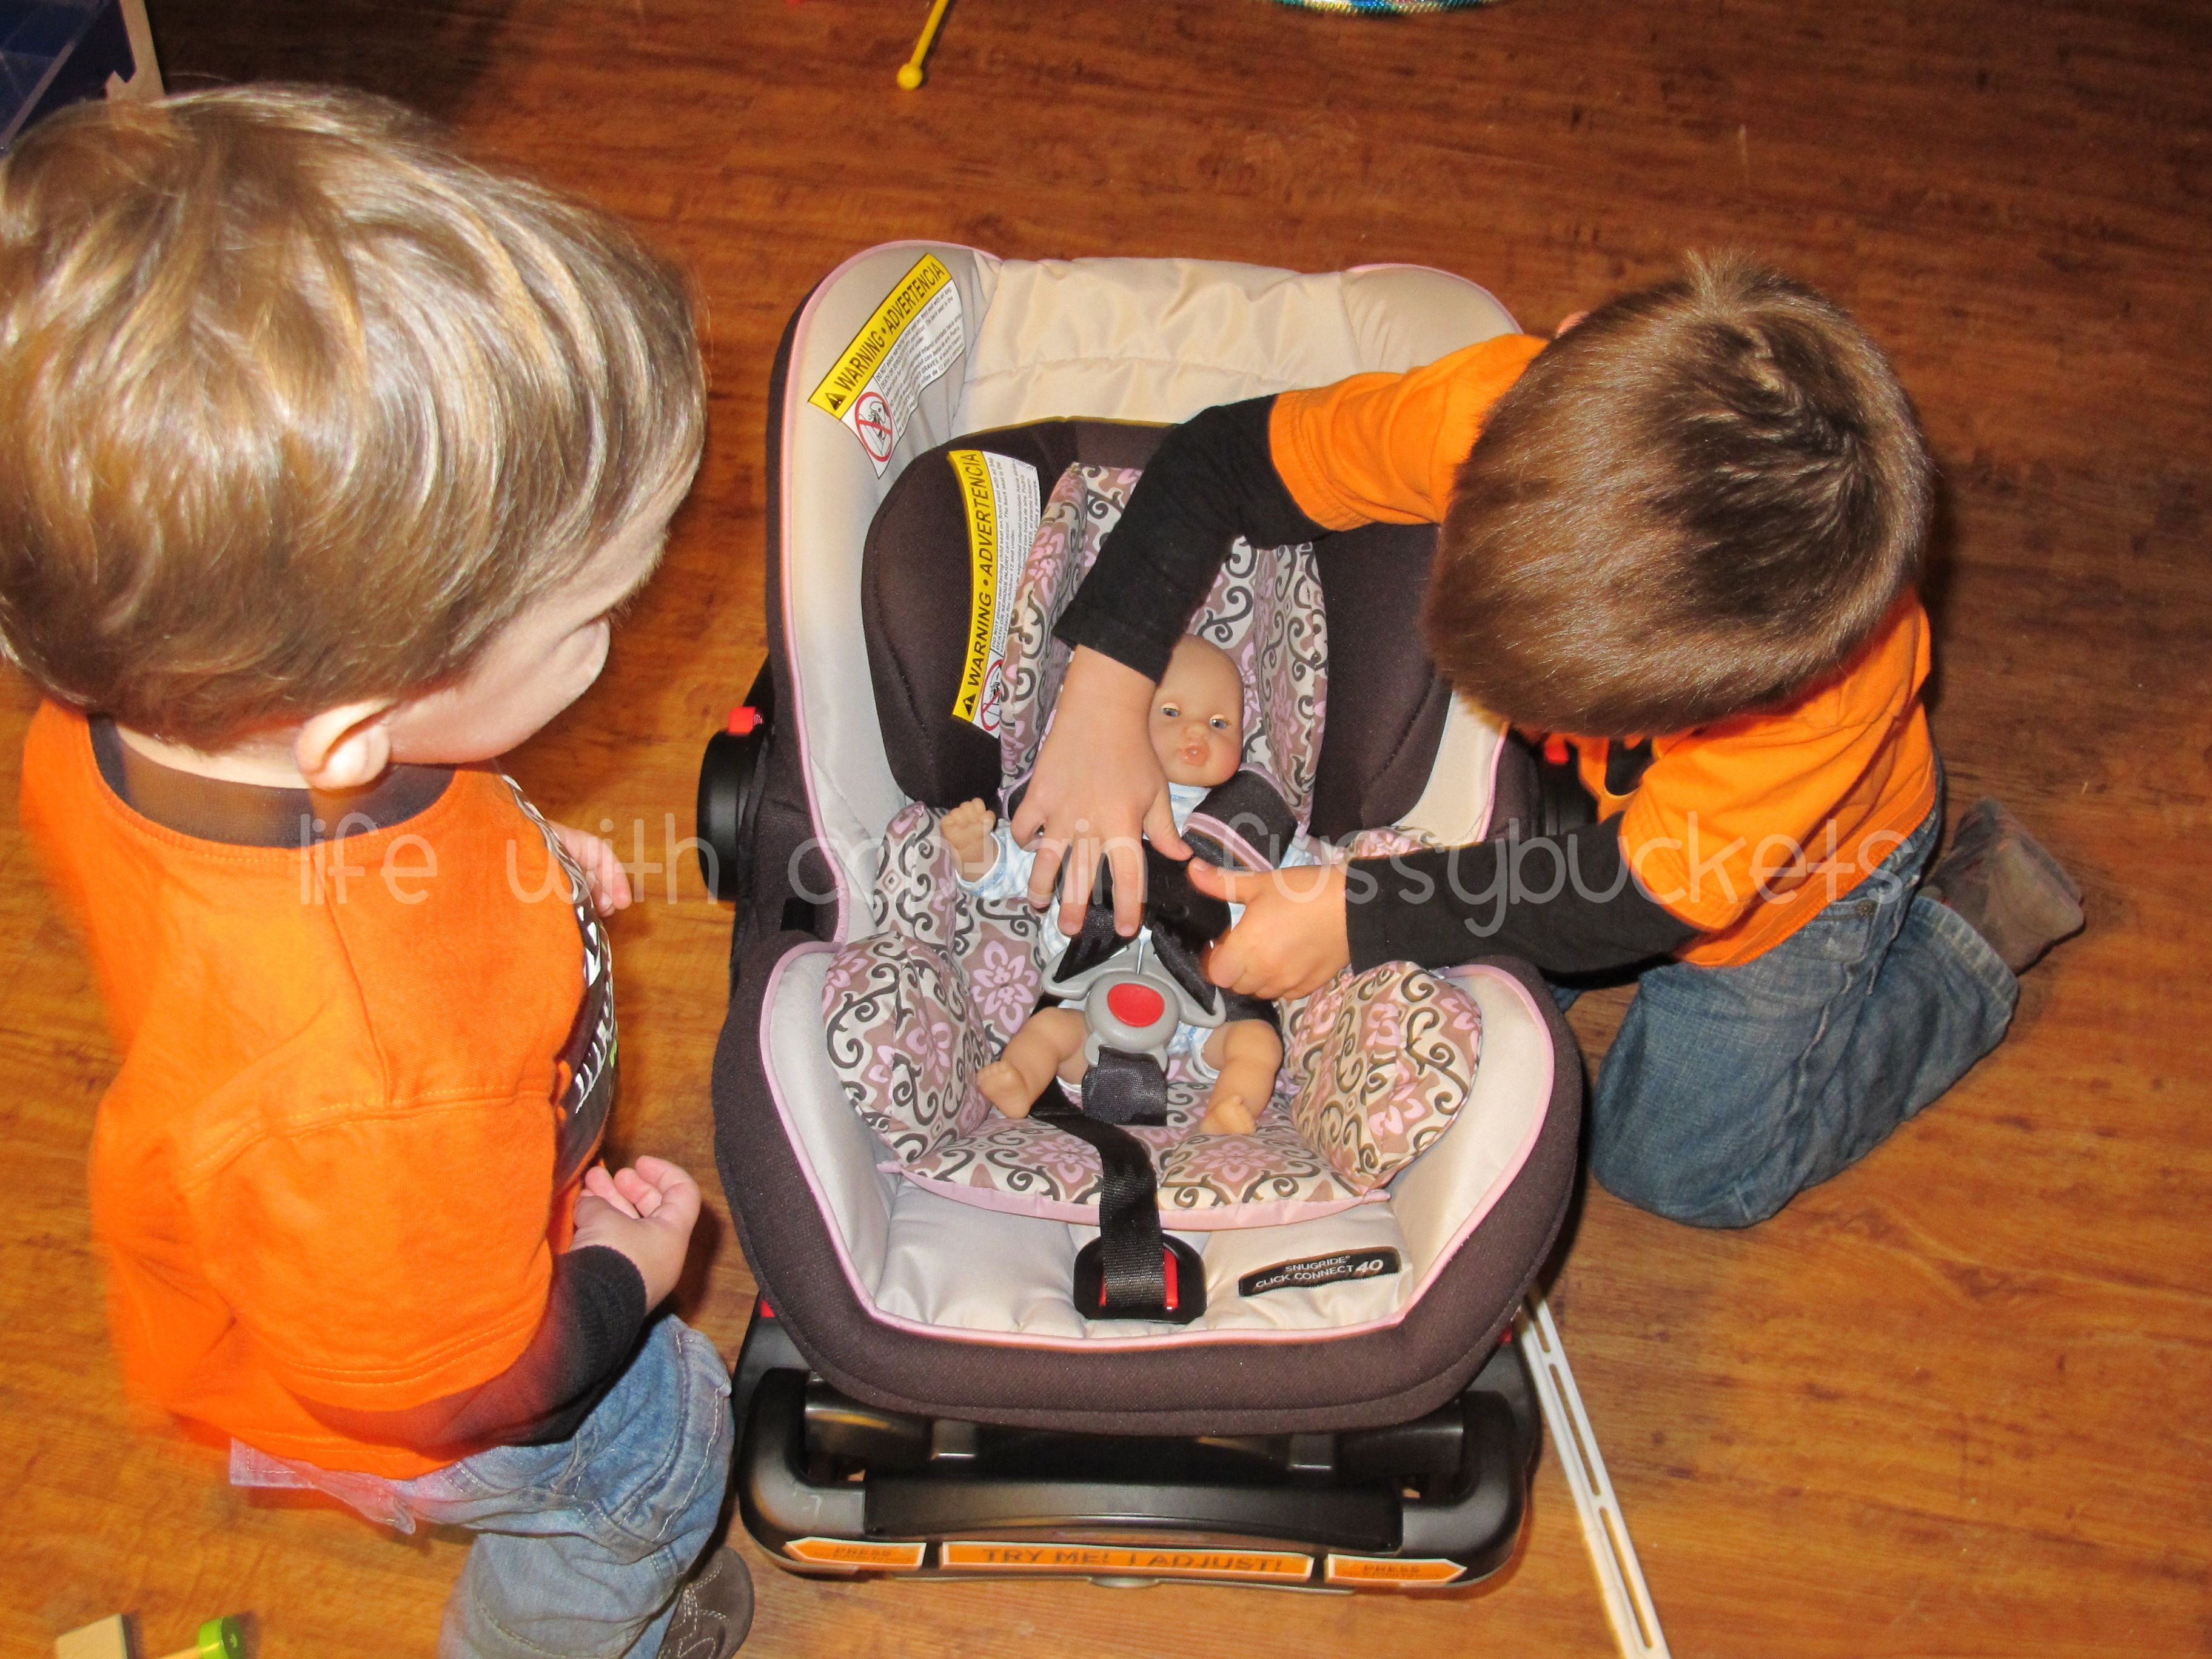 The Graco SnugRide Click Connect 40 Carseat is For Birth Through Age 2